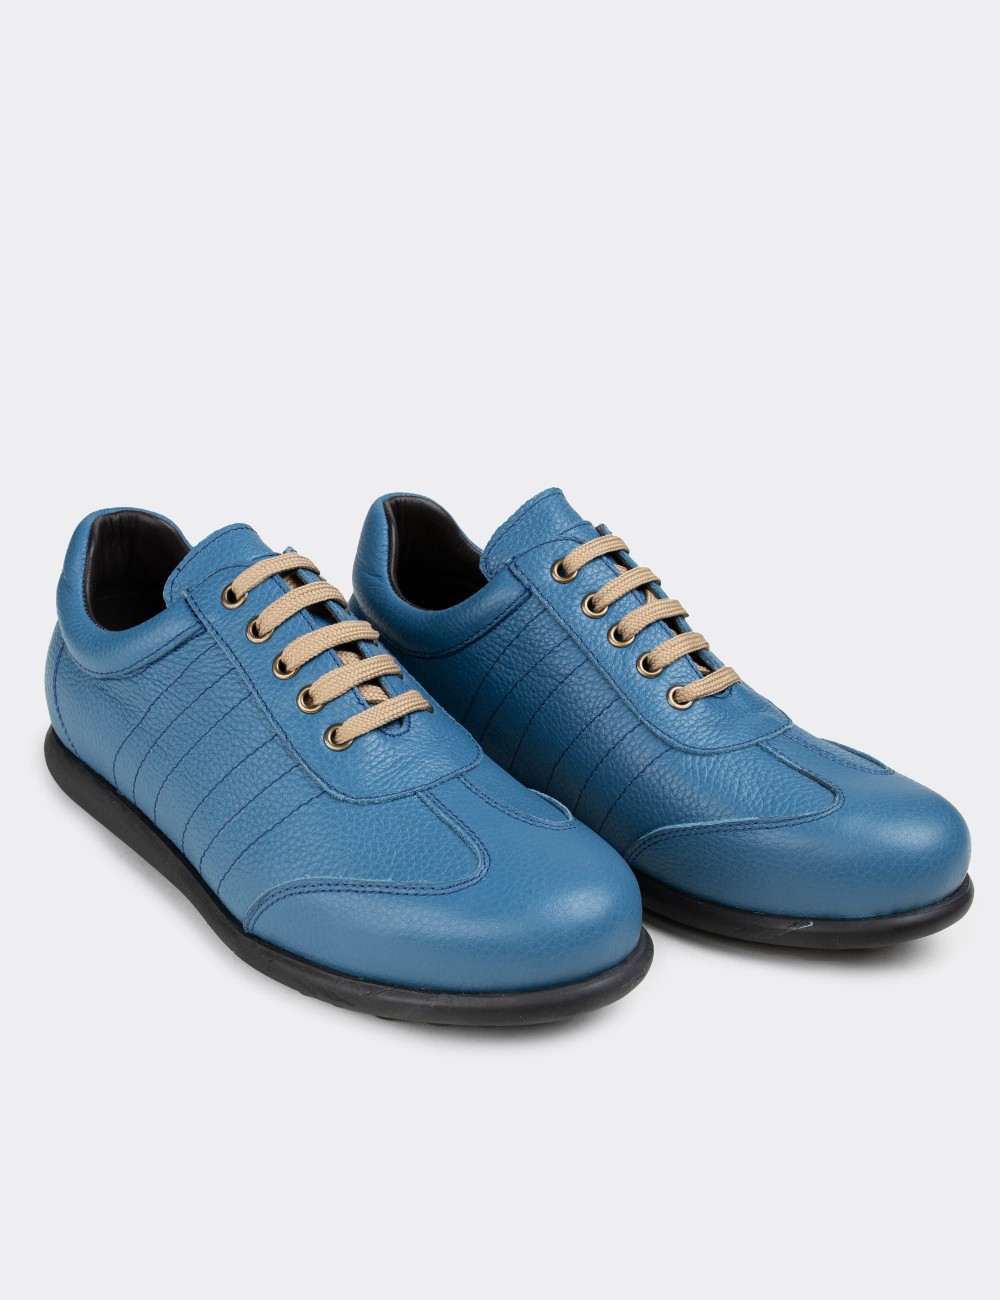 Blue  Leather Lace-up Shoes - 01826MMVIC02